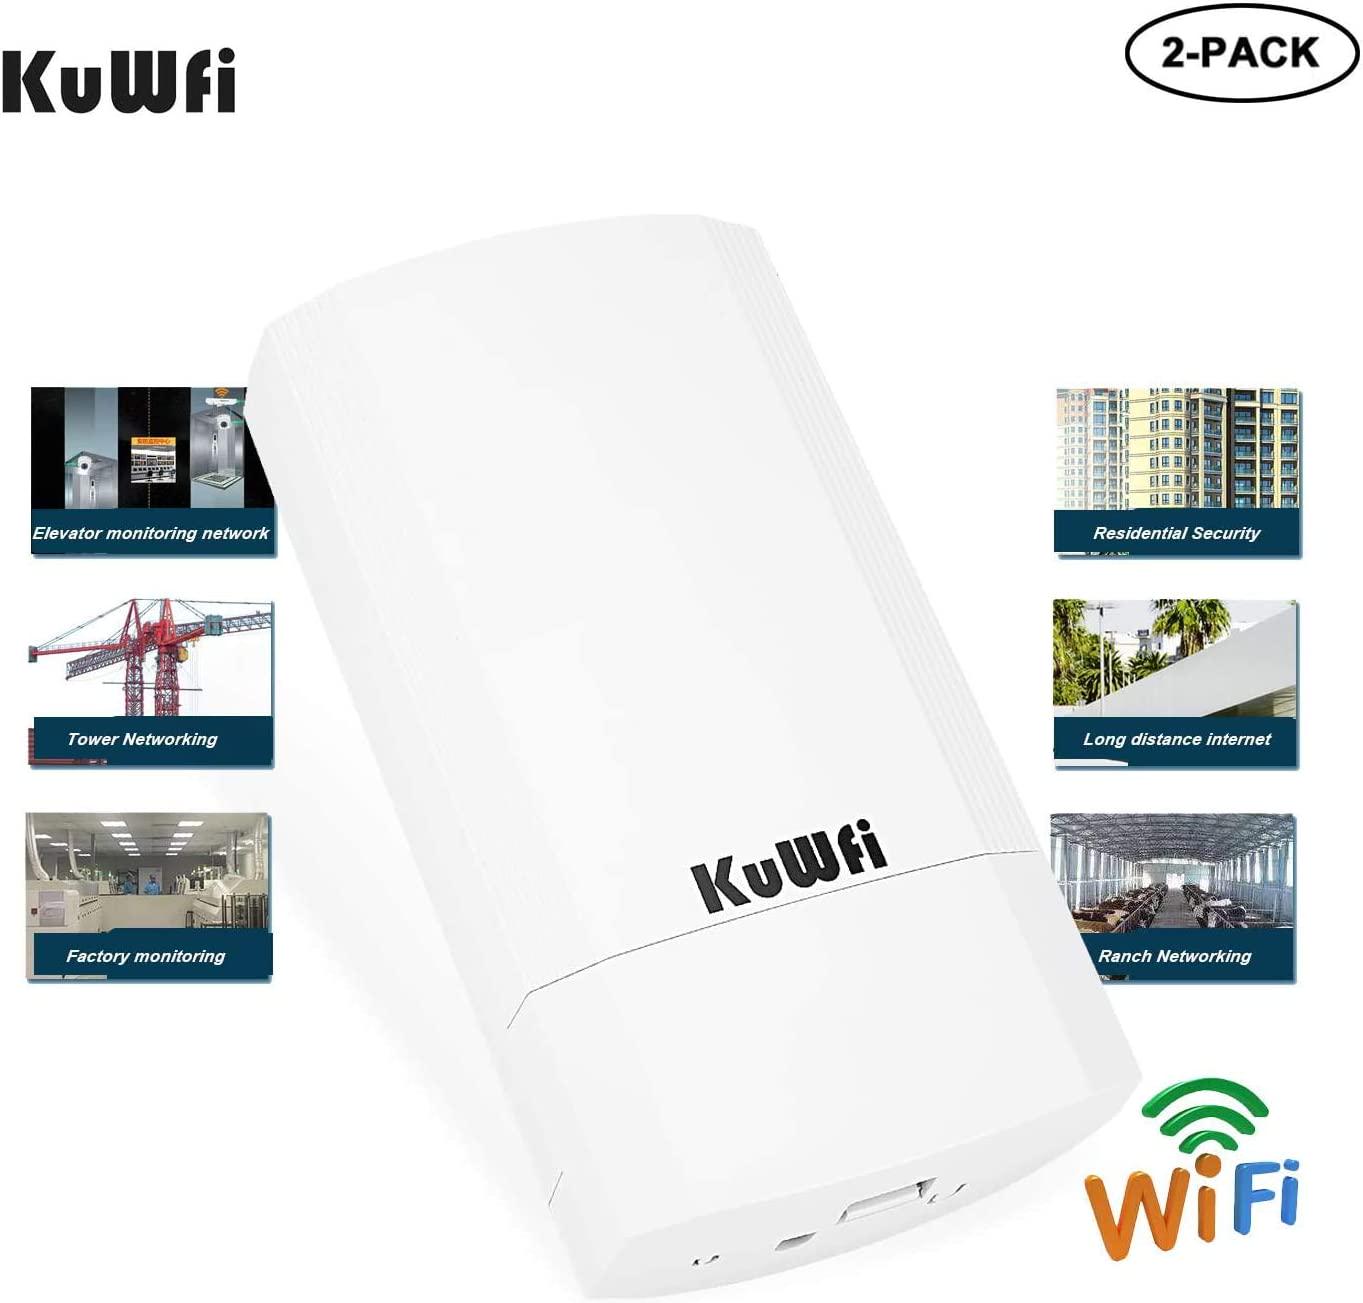 KuWFi, KuWFi 2-Pack Wireless Long Range WiFi Bridge 5.8G 900Mbps Point to Point Access Point Indoor/Outdoor AP CPE Kit Supports 2-3KM for PTP/PTMP